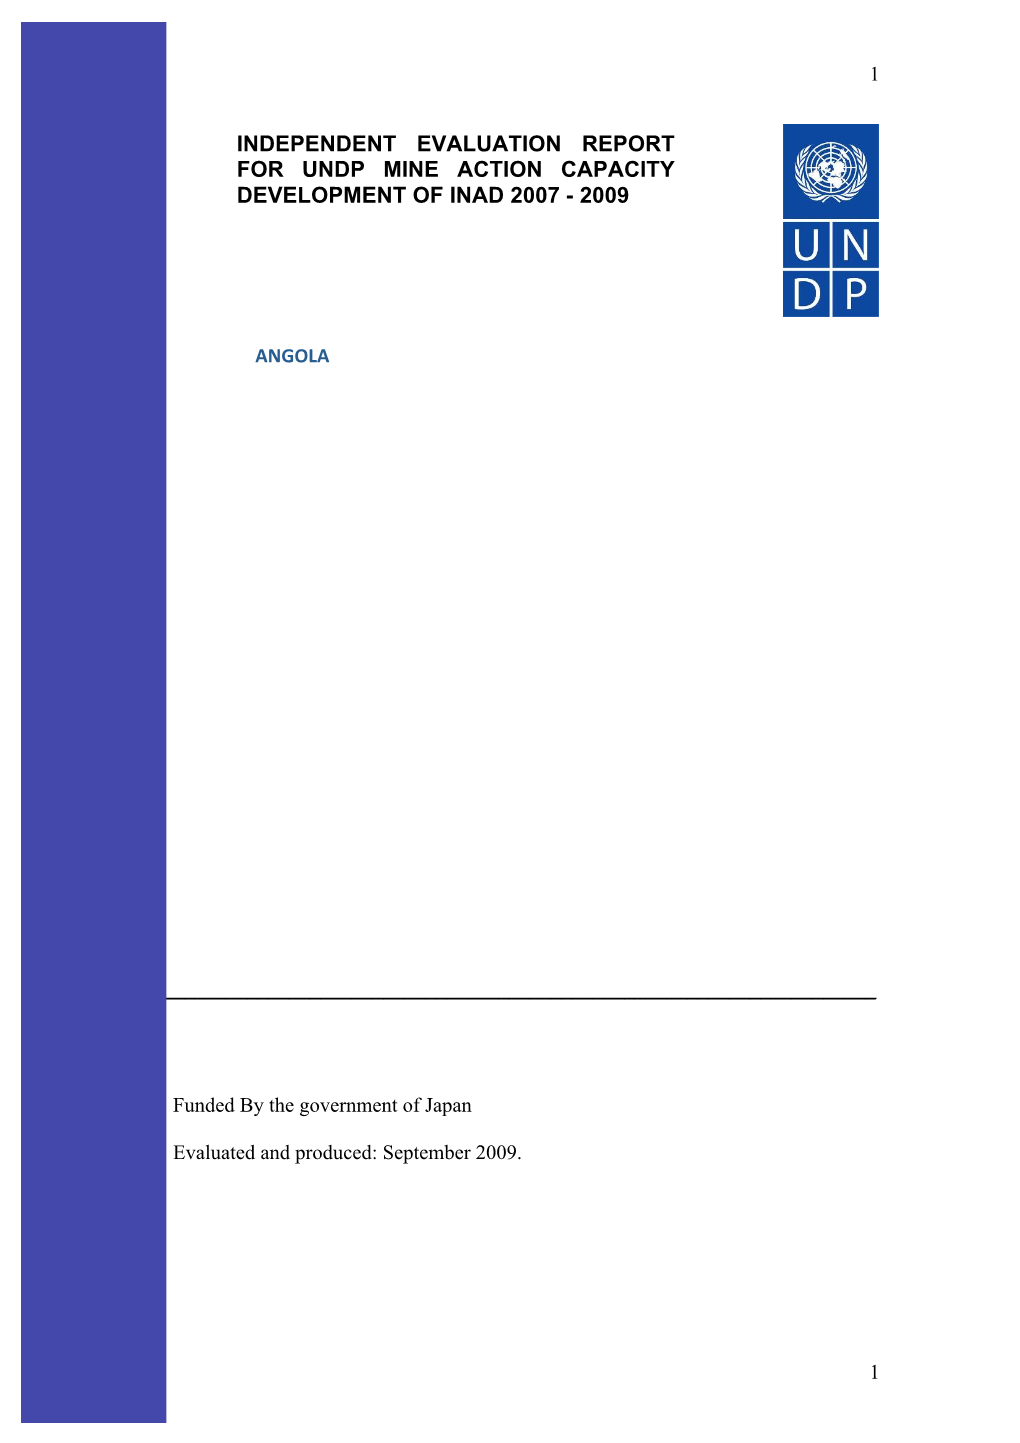 Independent Evaluation Report for Undp Mine Action Capacity Development of Inad 2007 - 2009